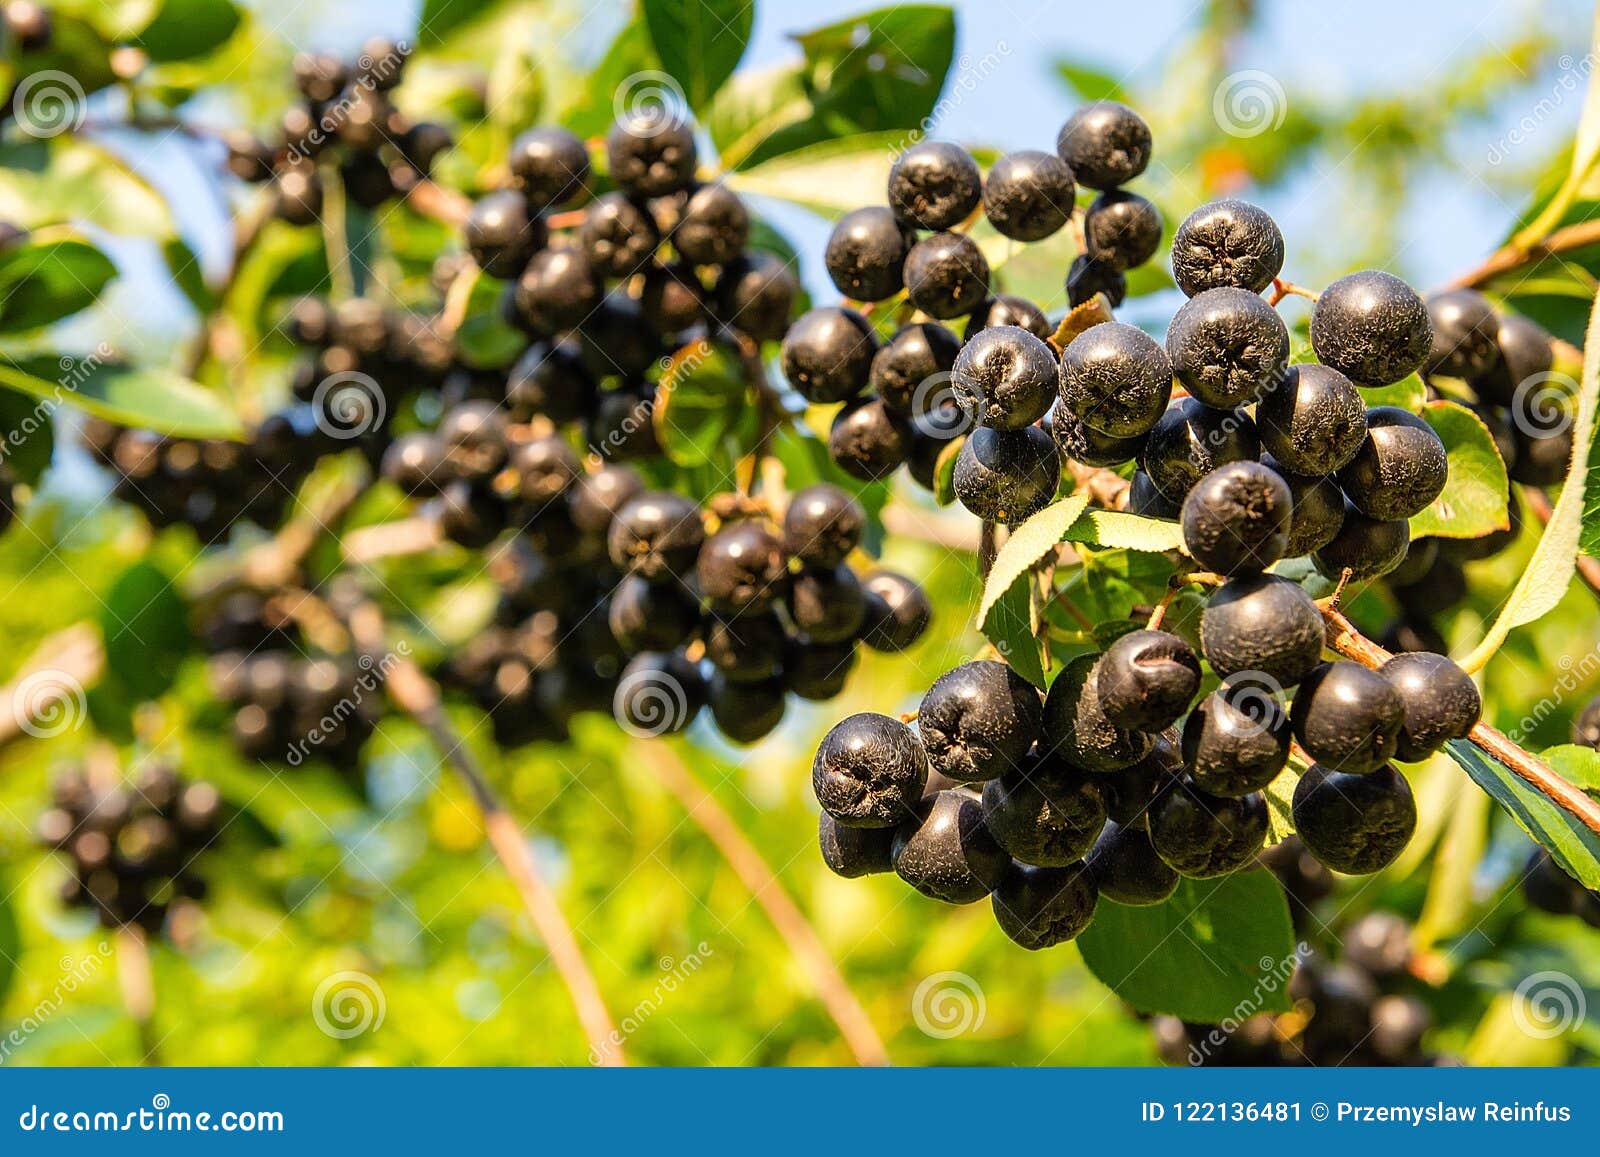 chokeberry aronia melanocarpa on tree in the orchard